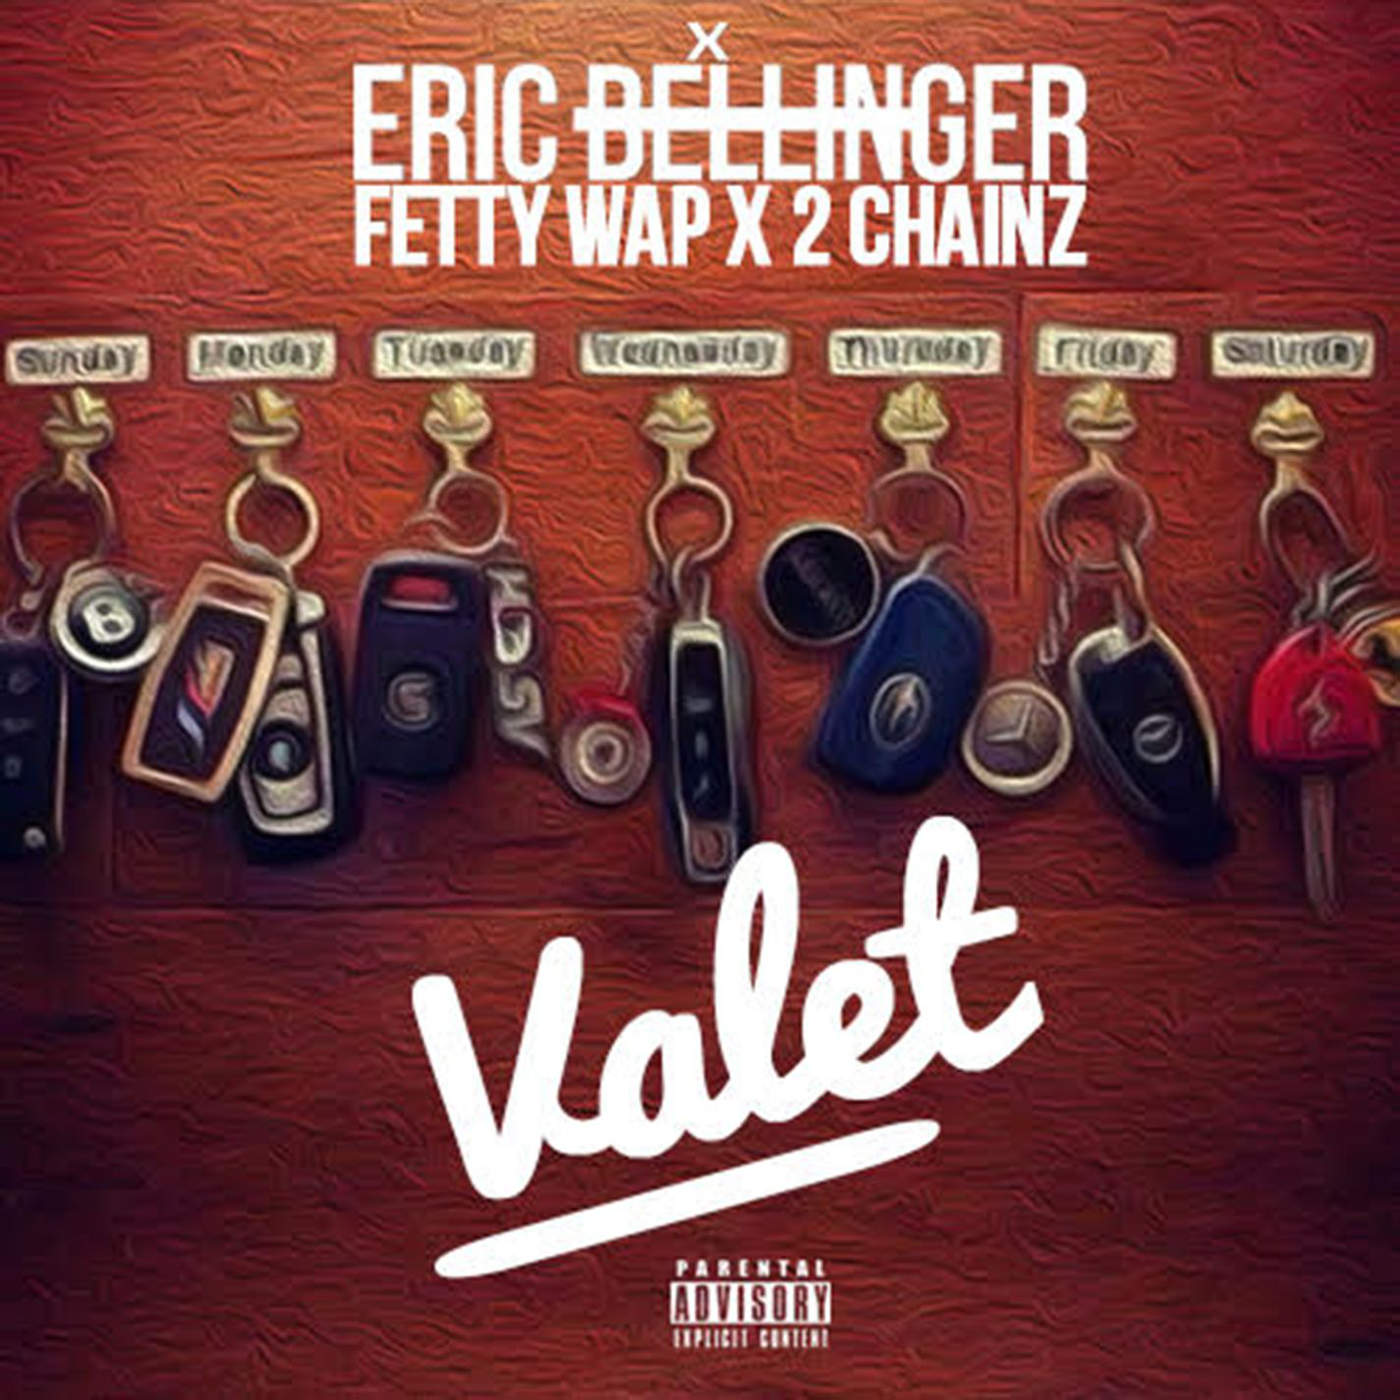 New Music: Eric Bellinger – 'Valet' (Feat. 2 Chainz & Fetty Wap) | HipHop-N-More